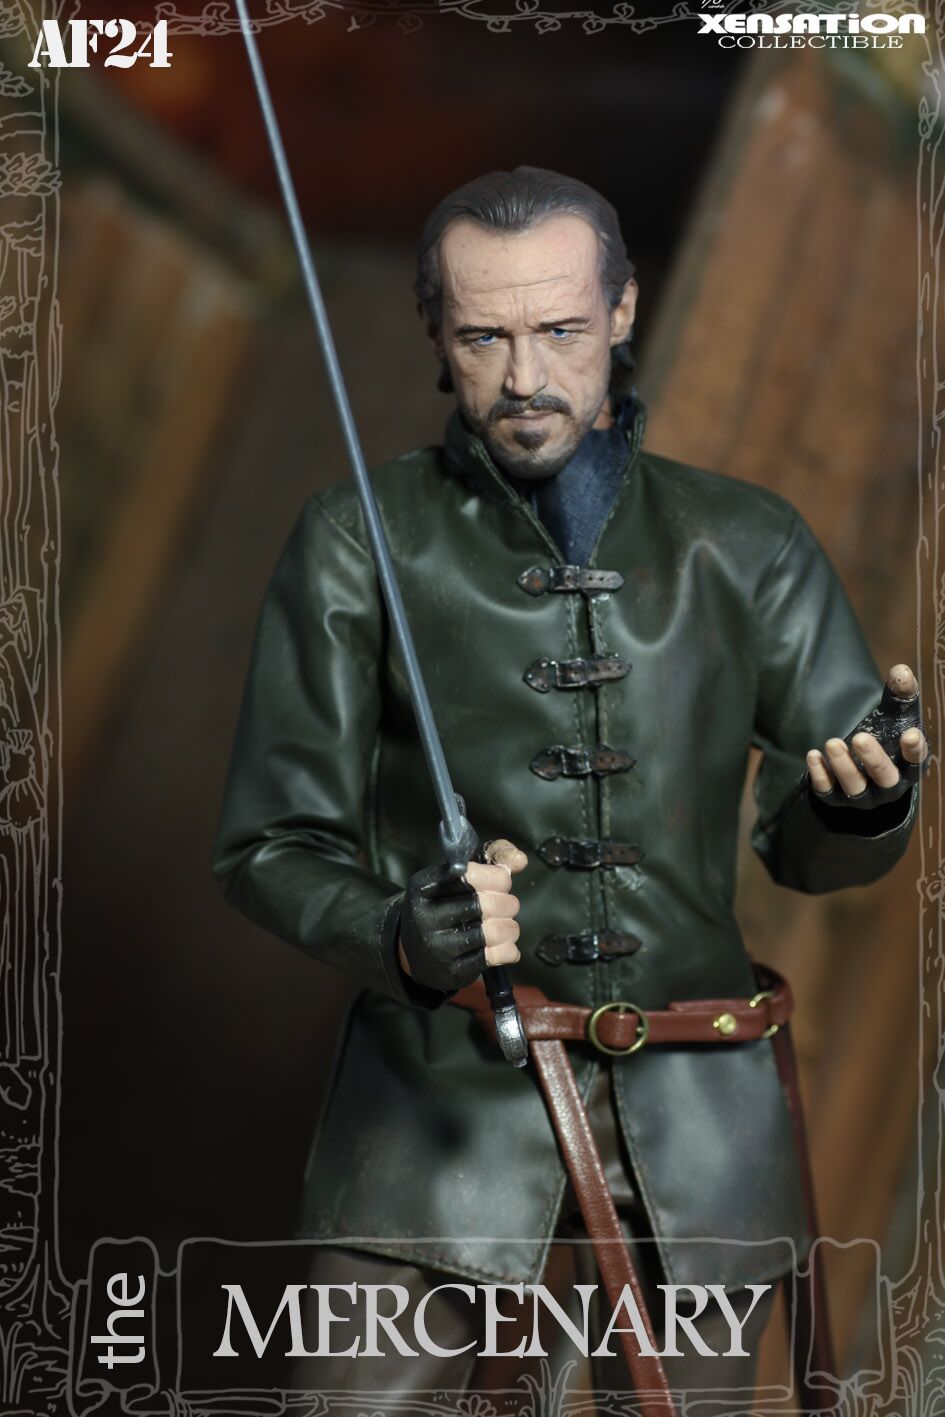 Fantasy - NEW PRODUCT: Xensation: 1/6 AF24 The Mercenary 15522412